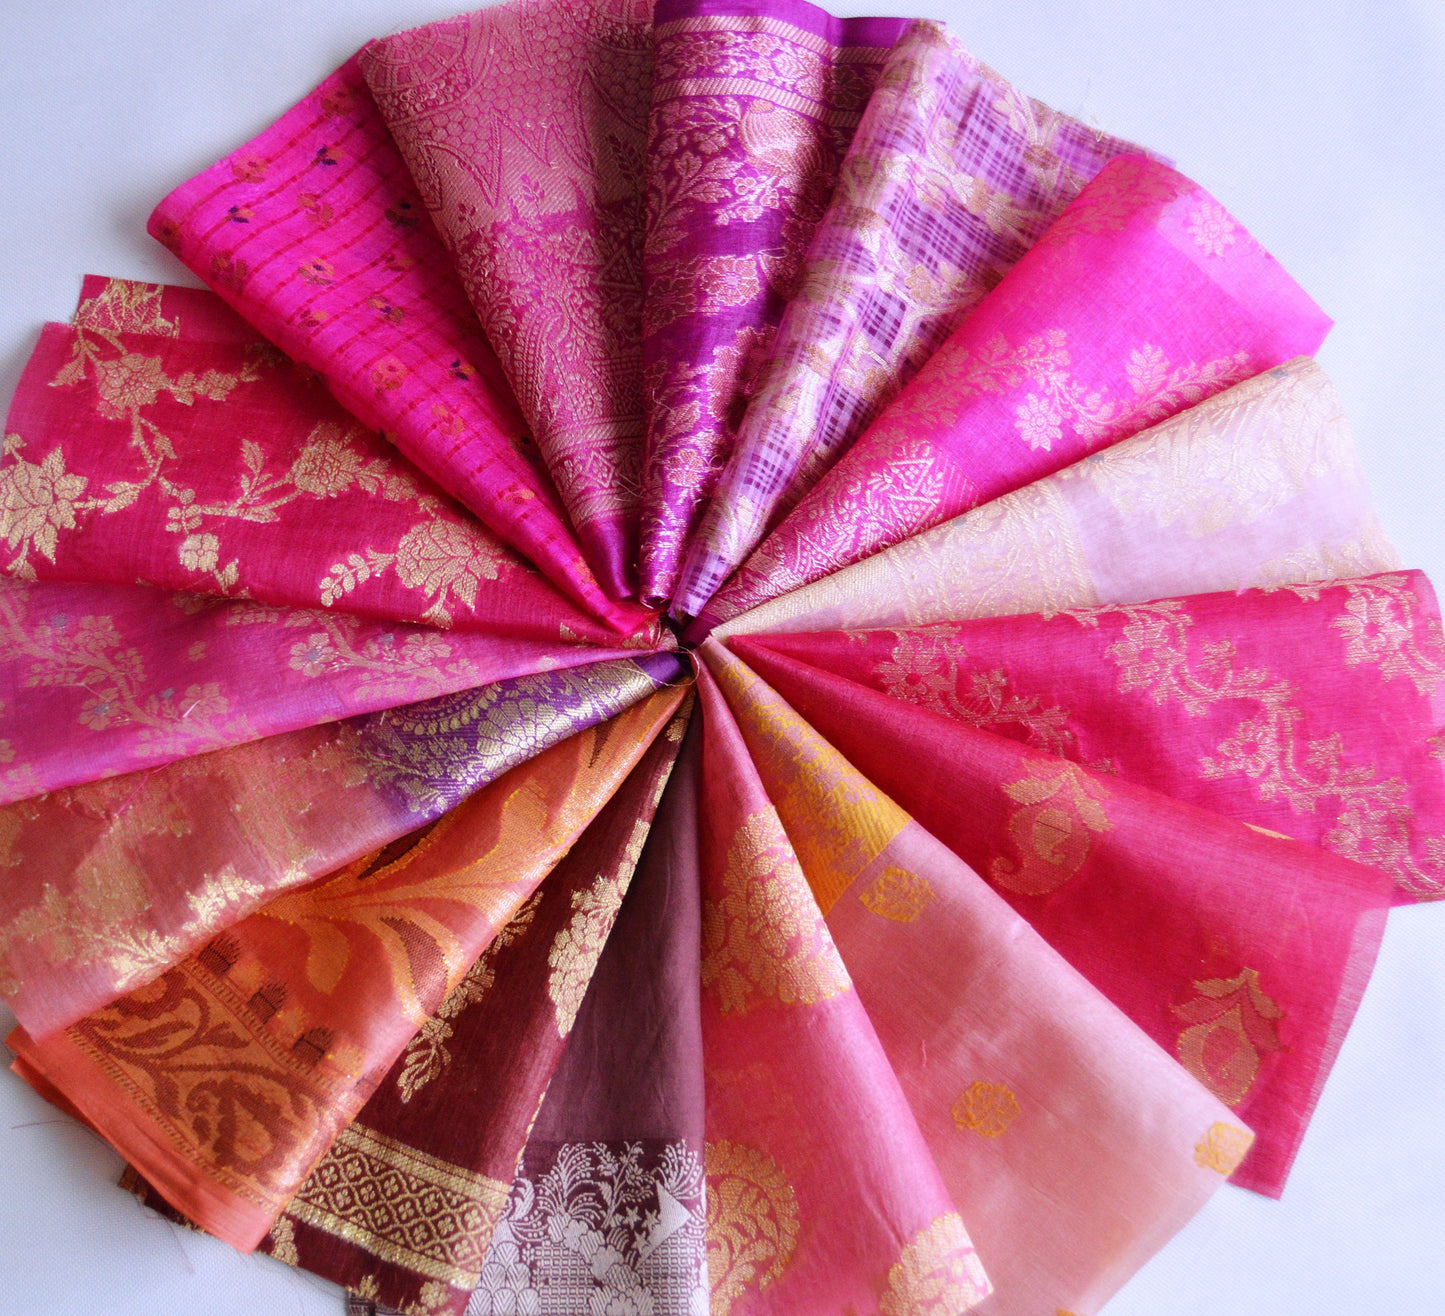 8 Inch x 16 Pieces Pink Recycled Vintage Sari Scraps Remnants Craft Fabric Card Making Collage Mixed Media Textile Art Junk Journals